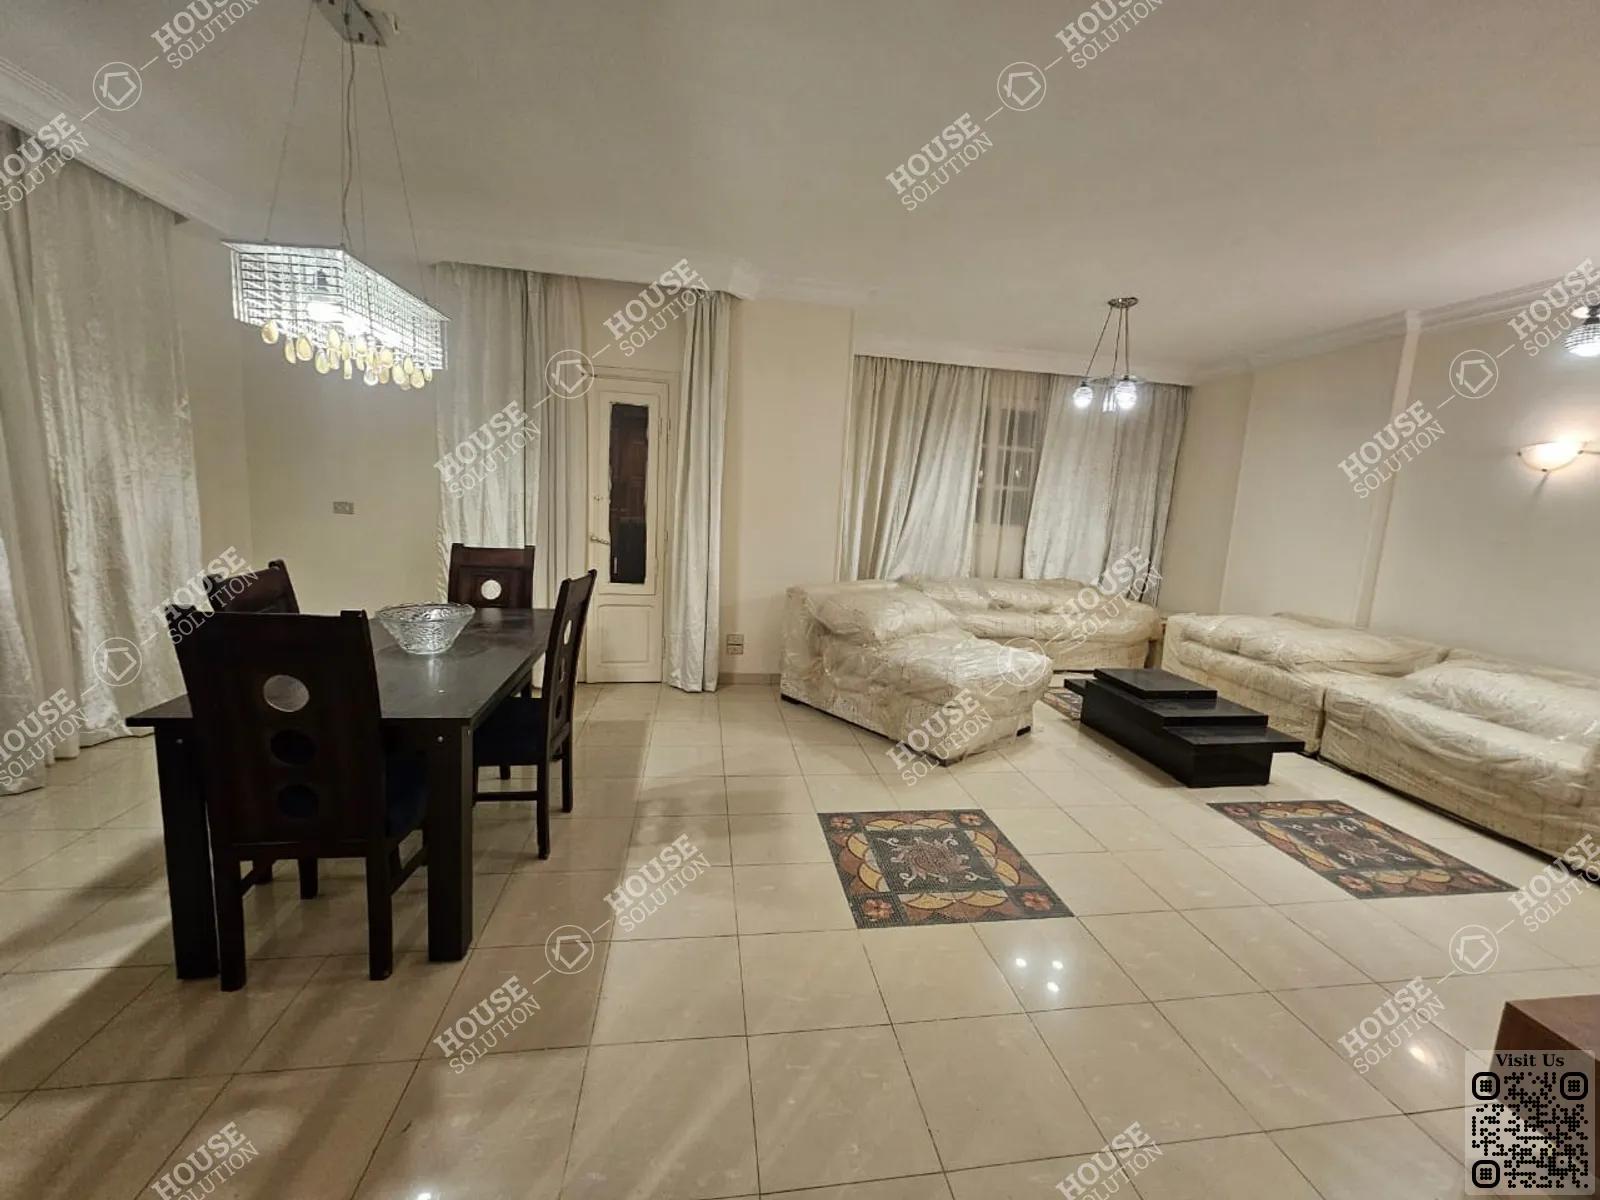 RECEPTION  @ Apartments For Rent In Maadi Maadi Degla Area: 165 m² consists of 3 Bedrooms 2 Bathrooms Modern furnished 5 stars #5814-2